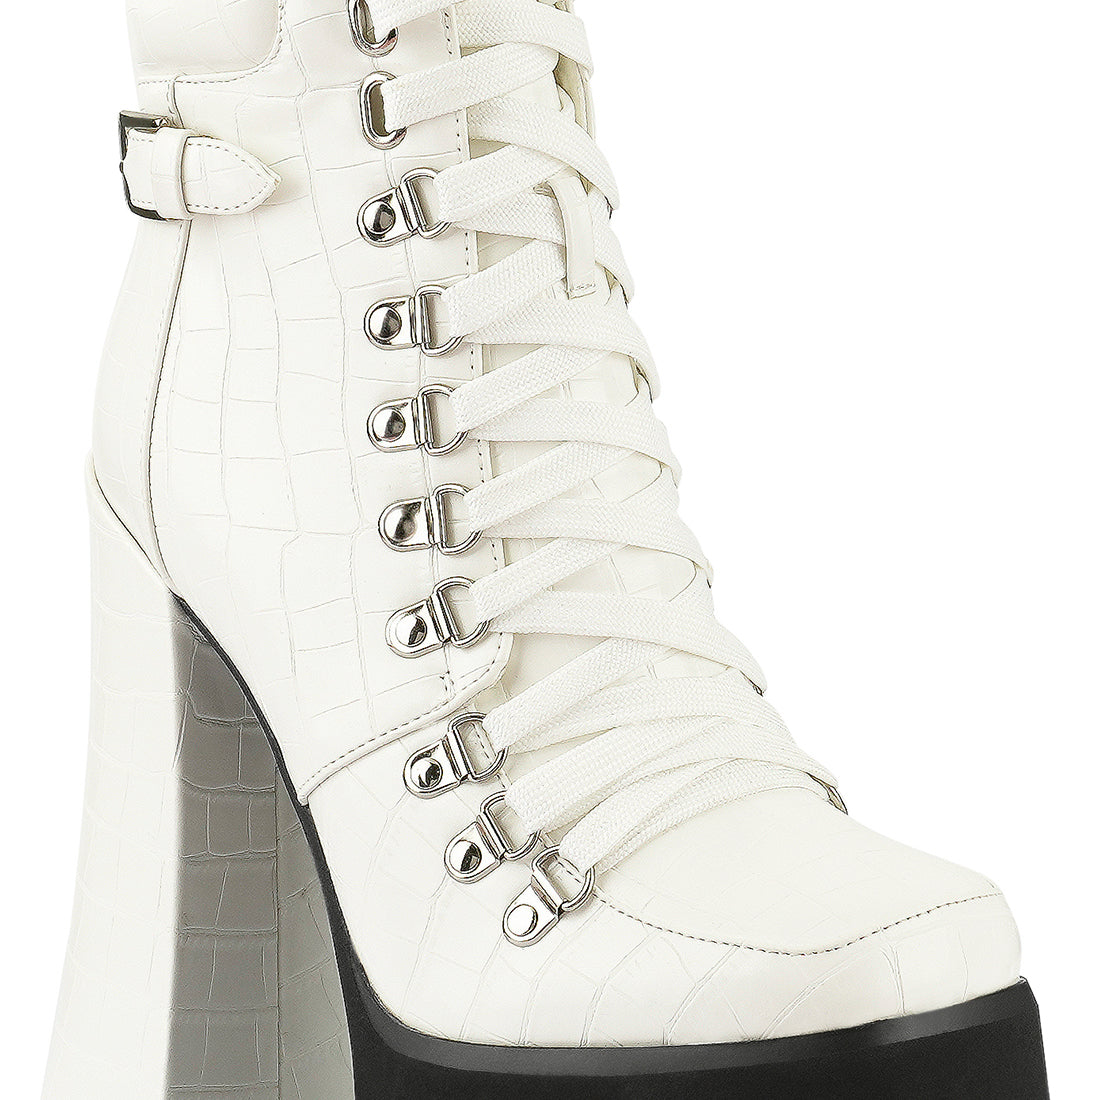 White High Heeled Platform Ankle Boots